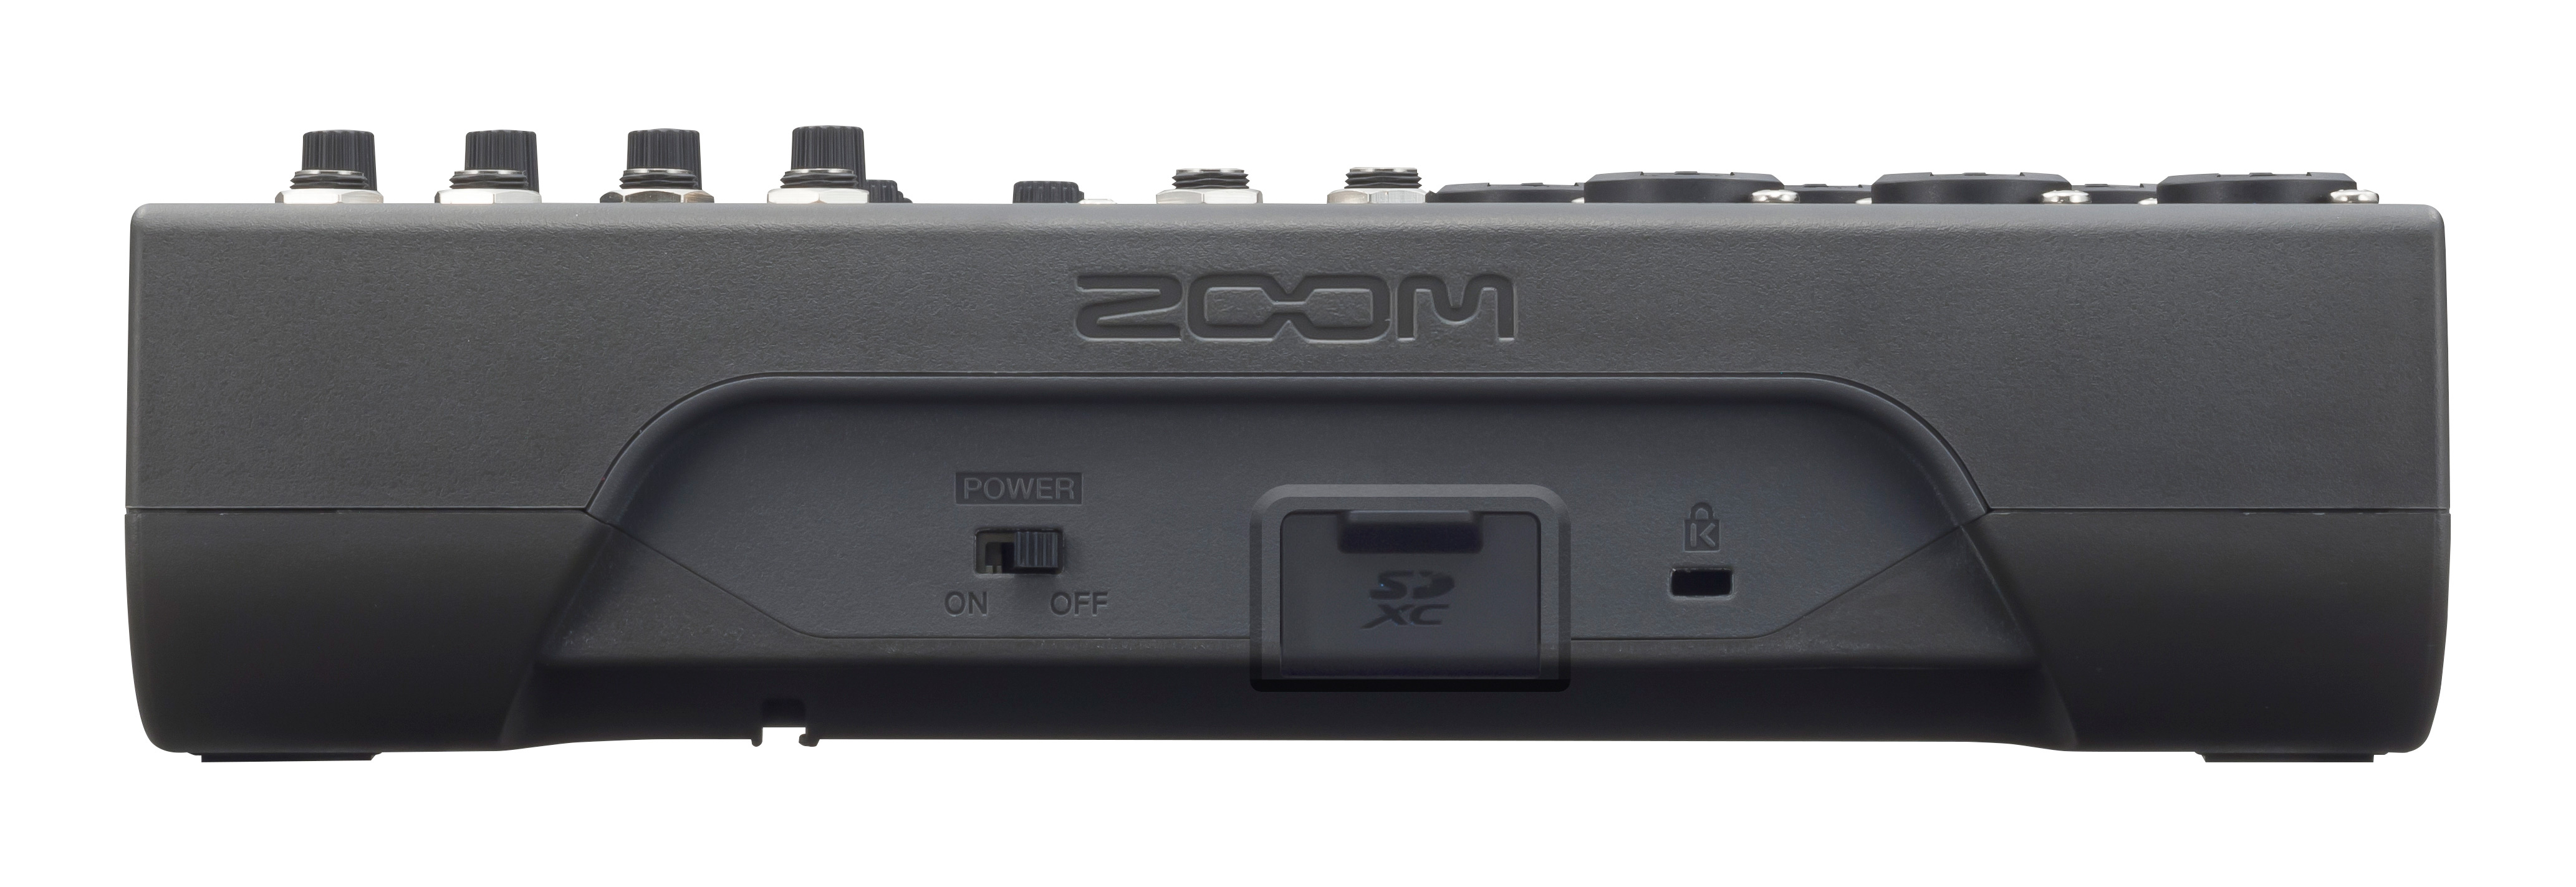 ZOOM LiveTrack L 8 rear mixer for streaming internet broadcast